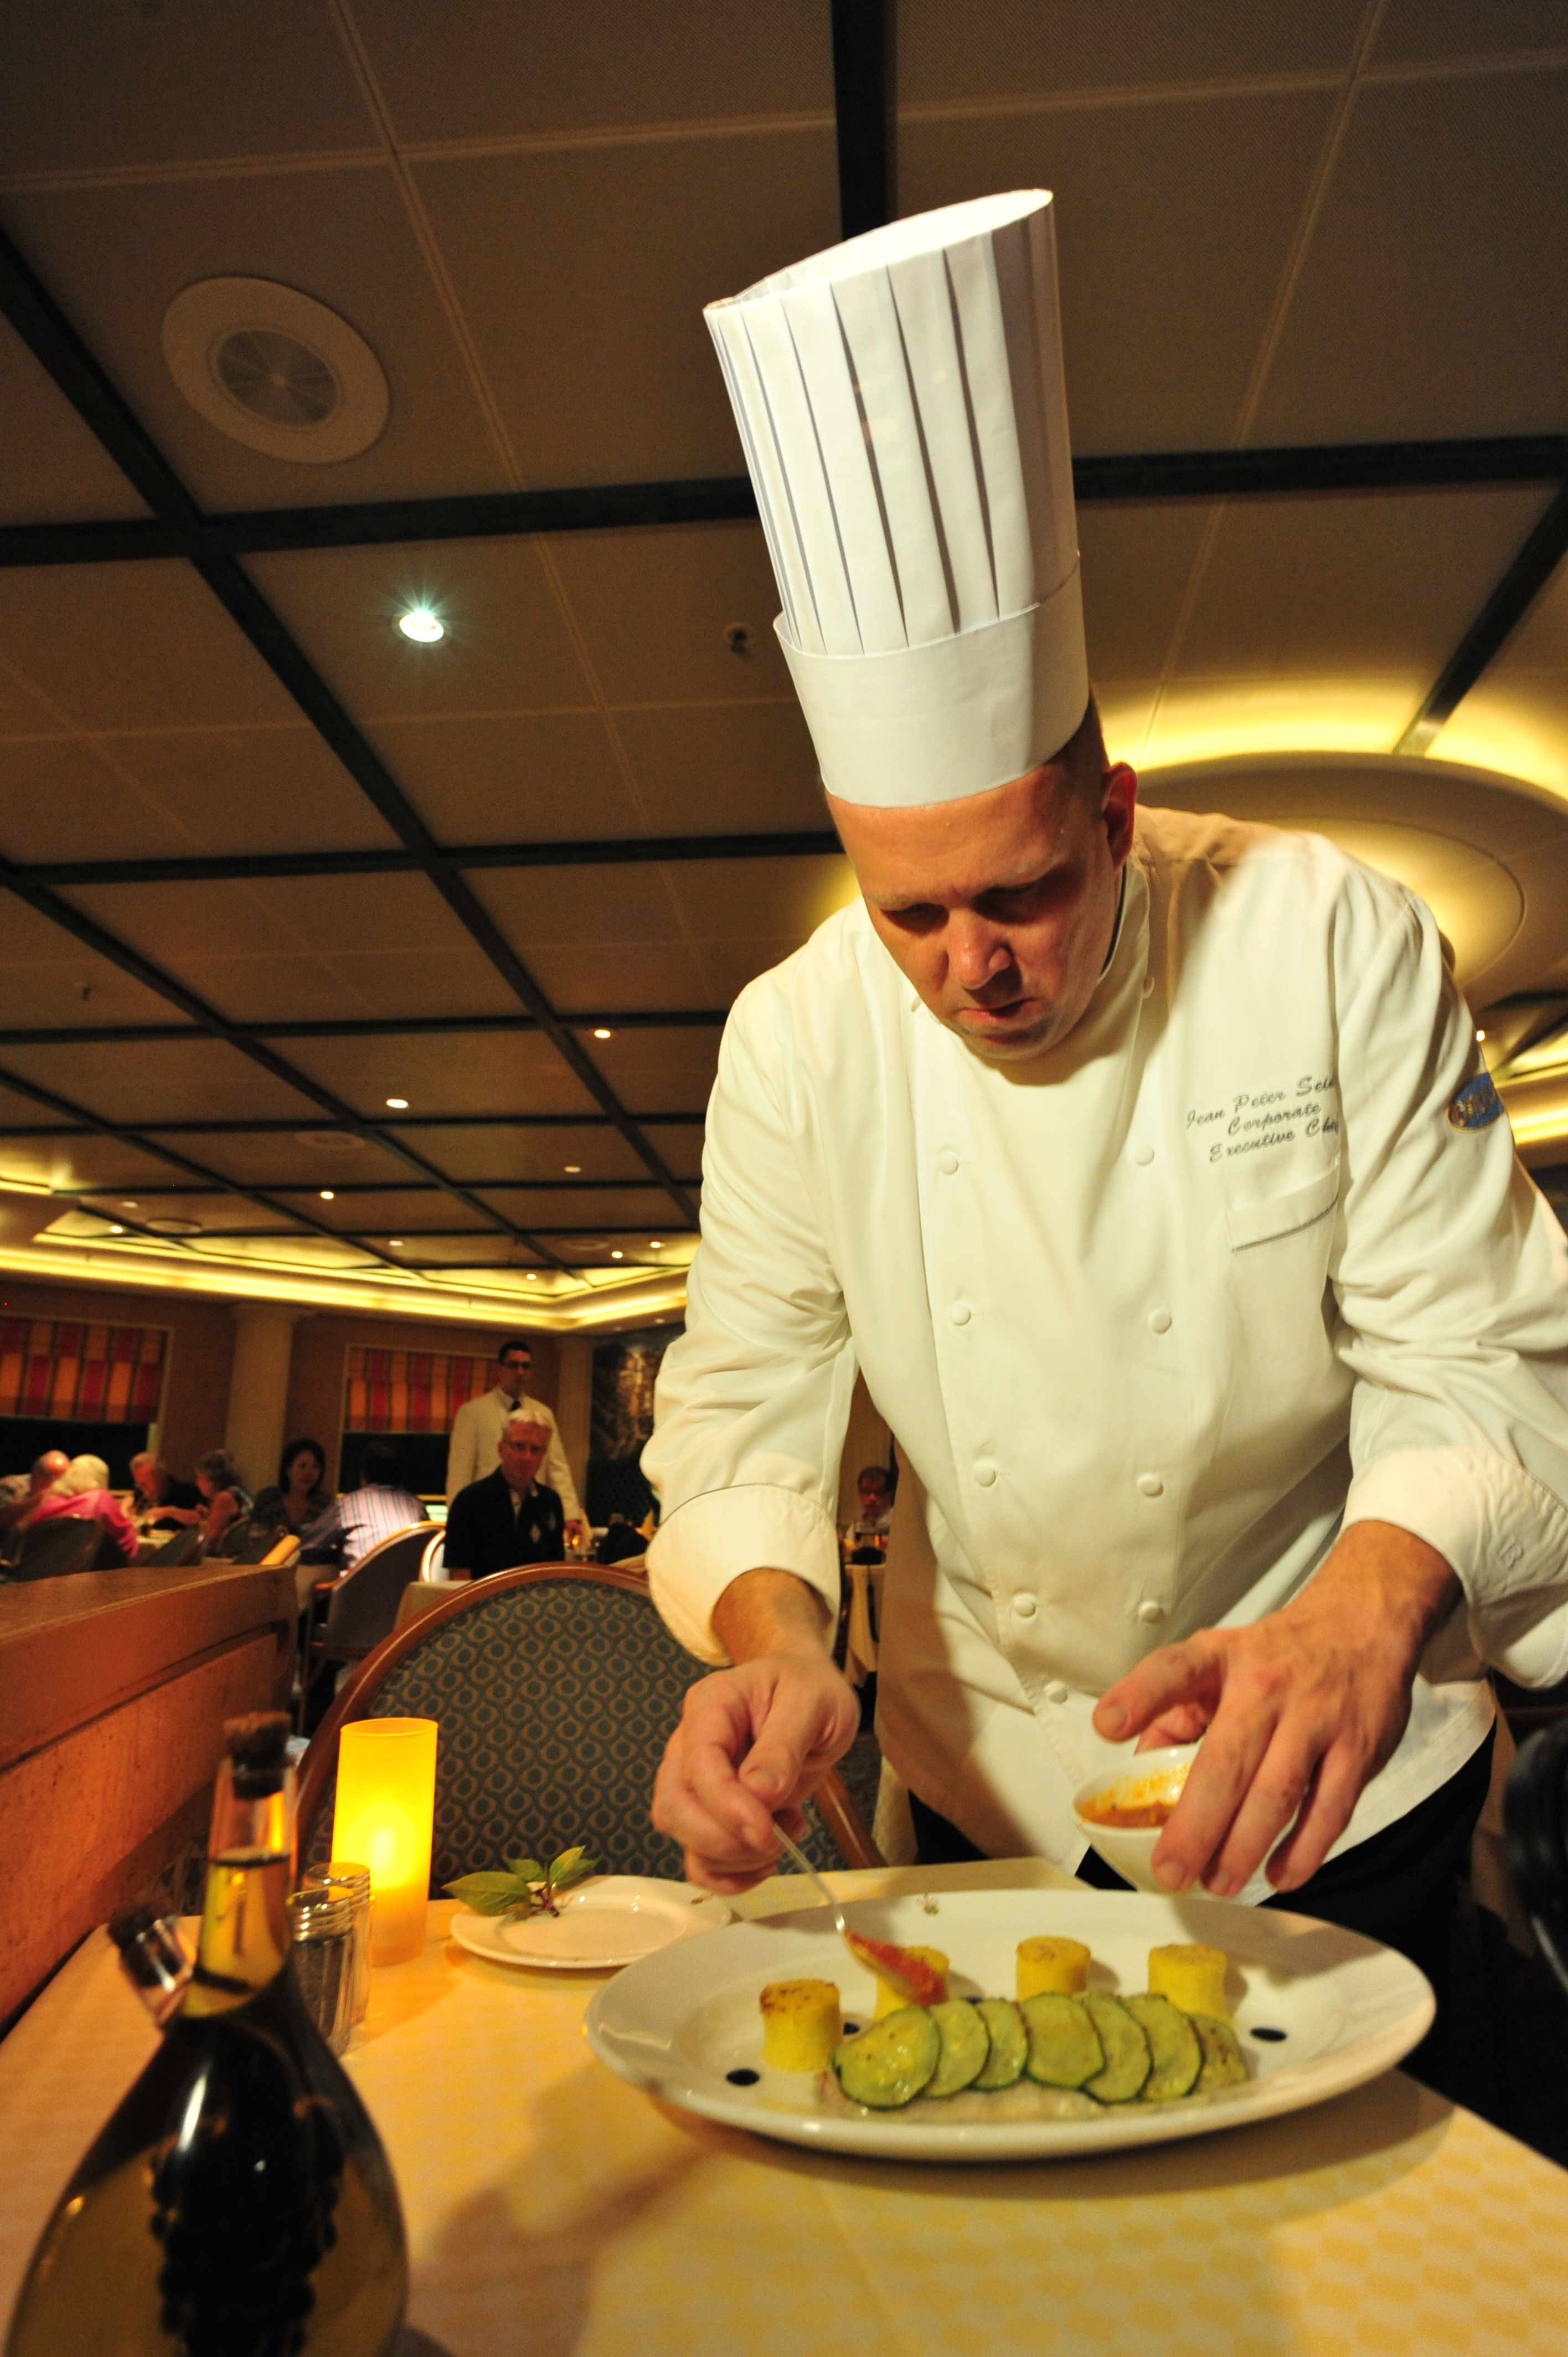 Meet German chef of 5-star cruise ship once docking in Vietnam